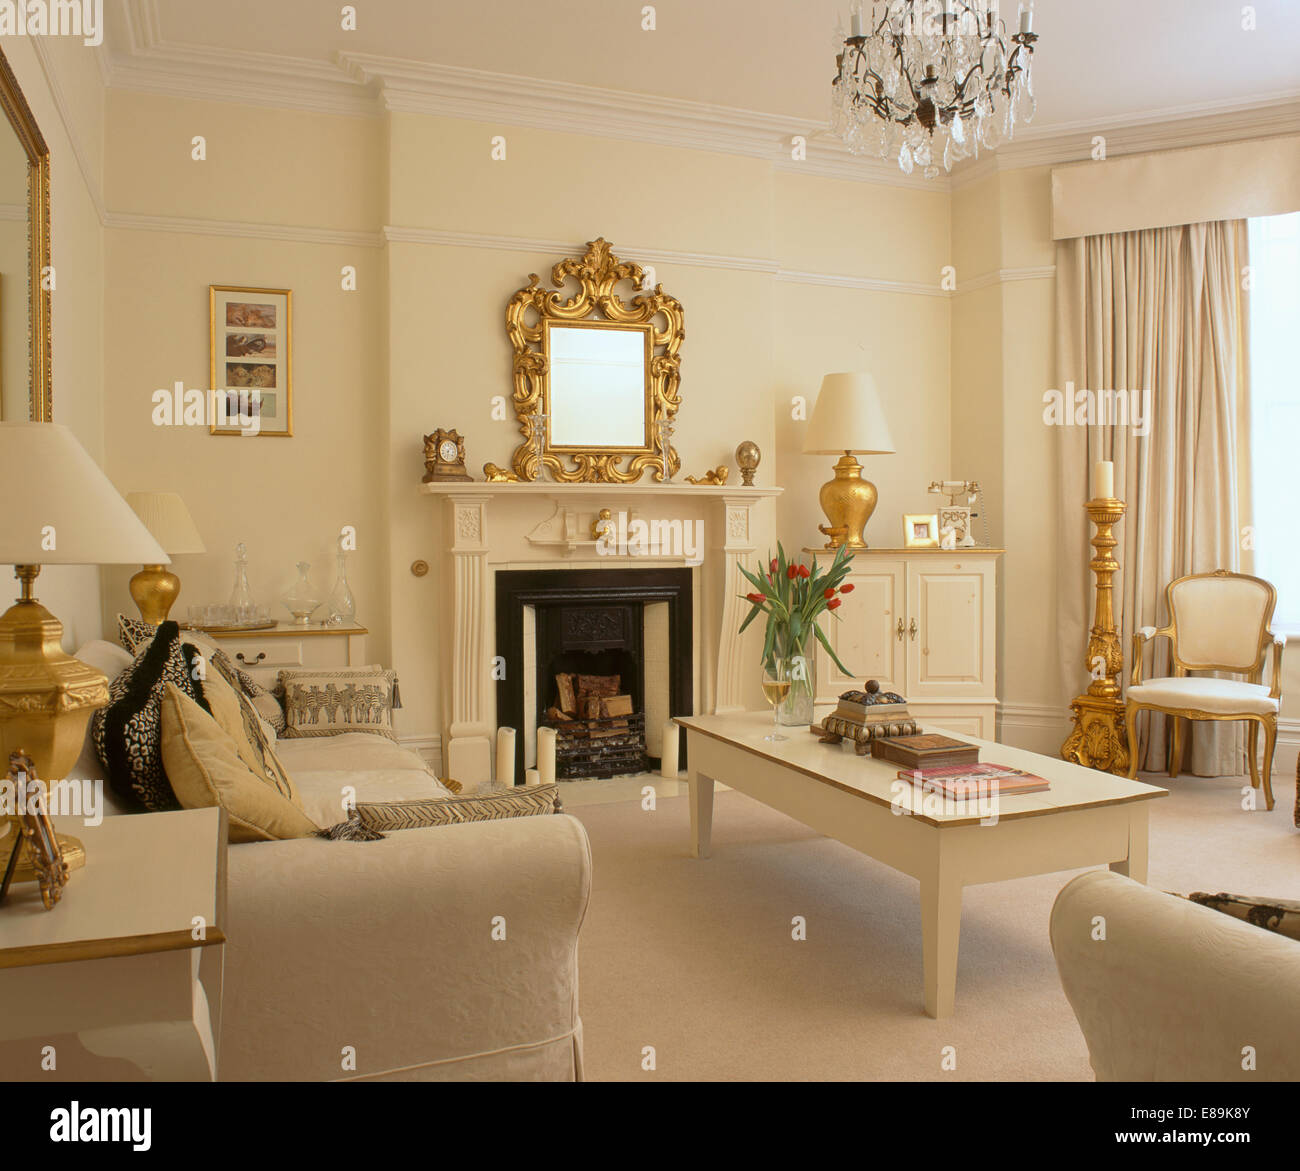 Cream Living Room With Cream Table And Sofas And Gold Accessories